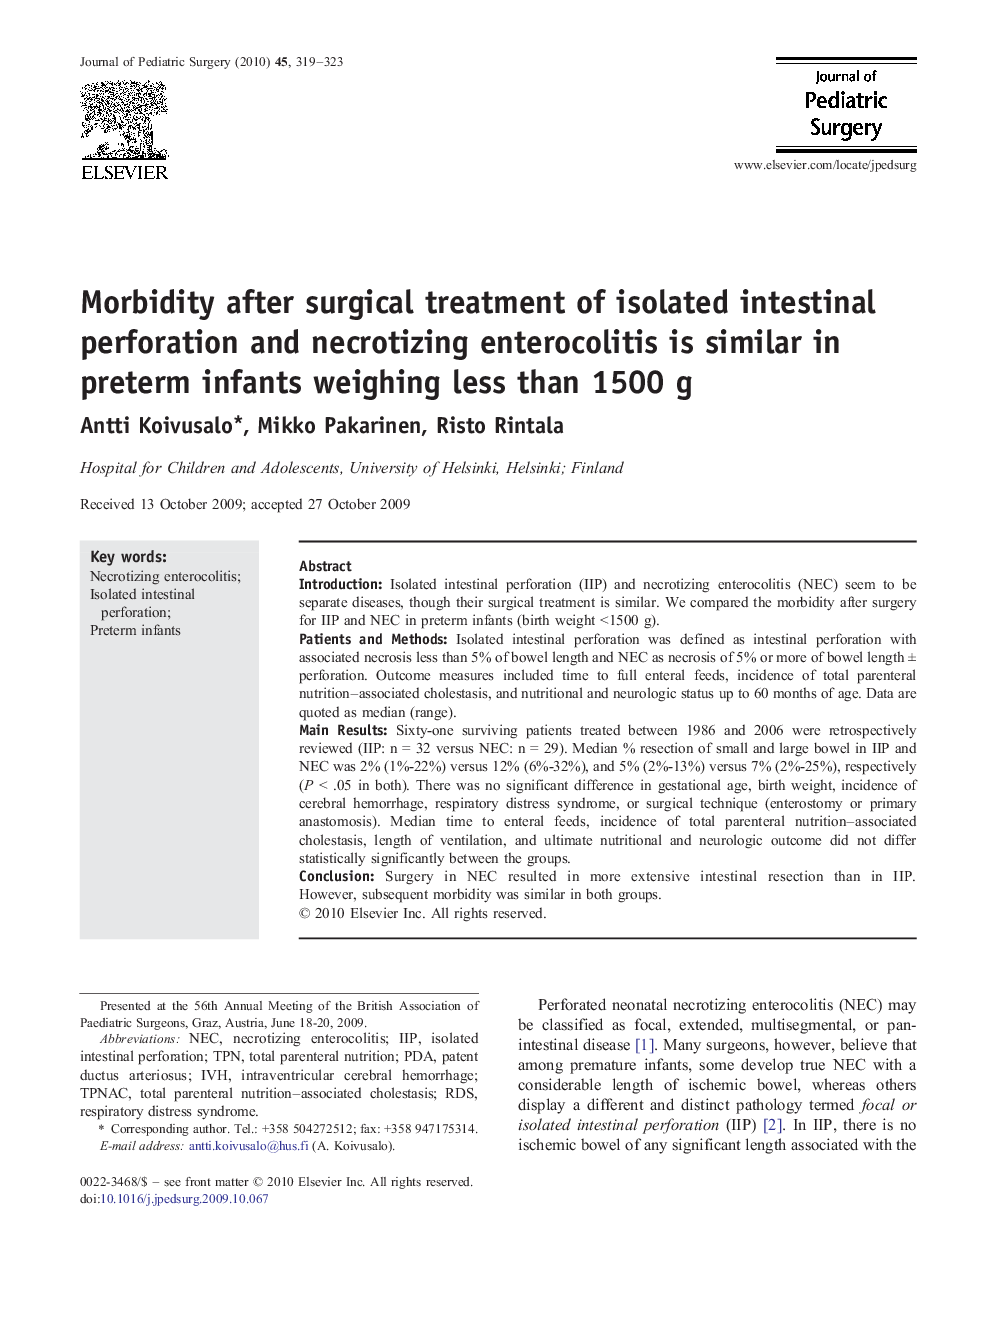 Morbidity after surgical treatment of isolated intestinal perforation and necrotizing enterocolitis is similar in preterm infants weighing less than 1500 g 